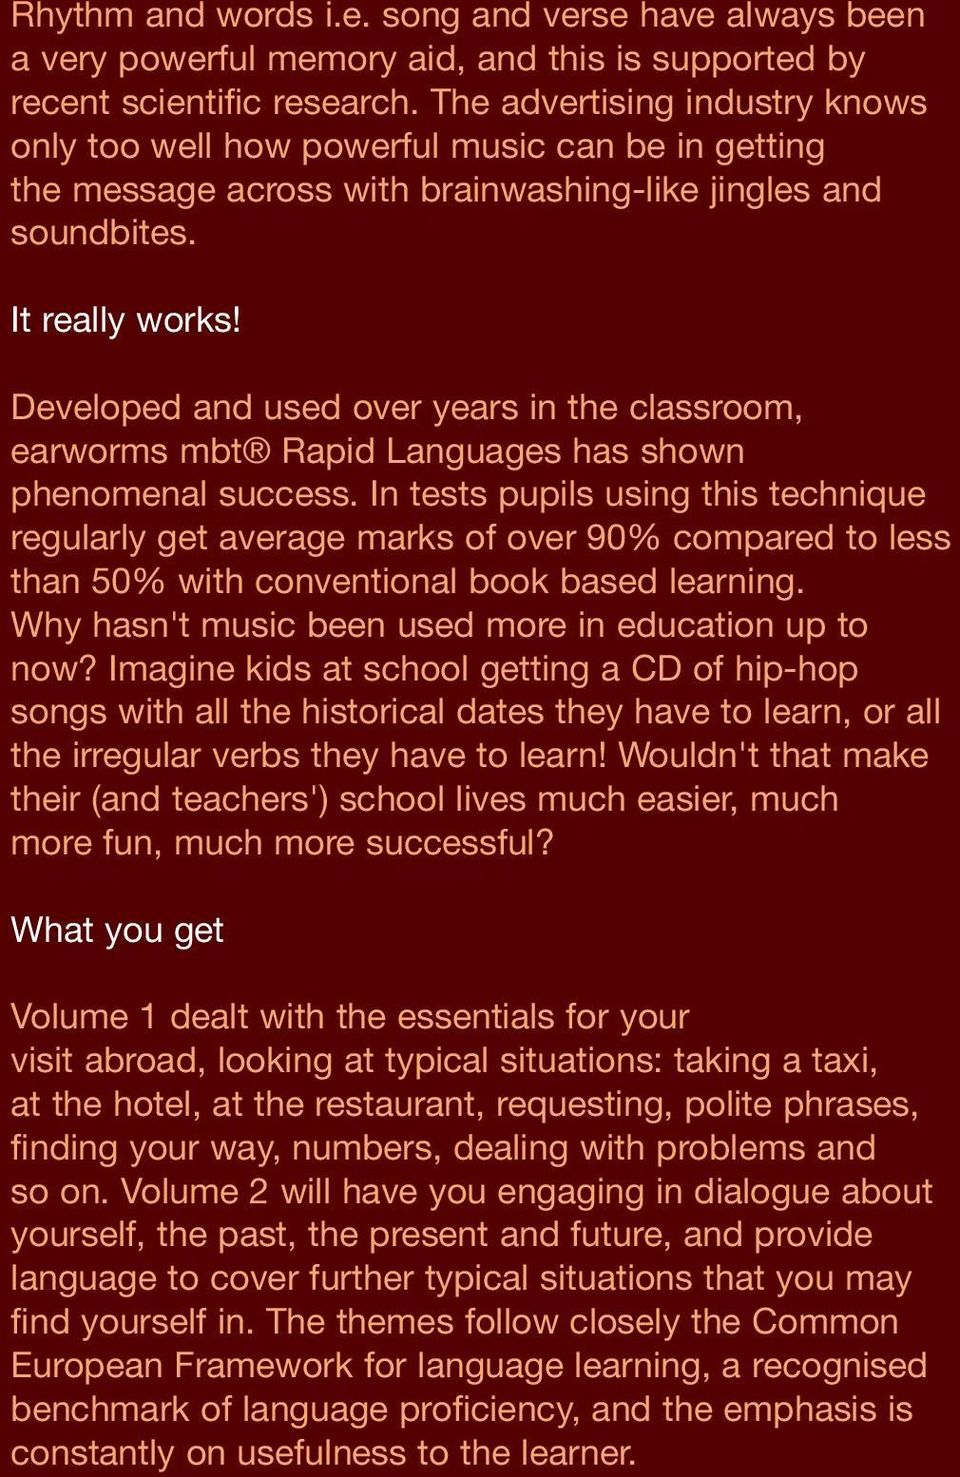 Developed and used over years in the classroom, earworms mbt Rapid Languages has shown phenomenal success.